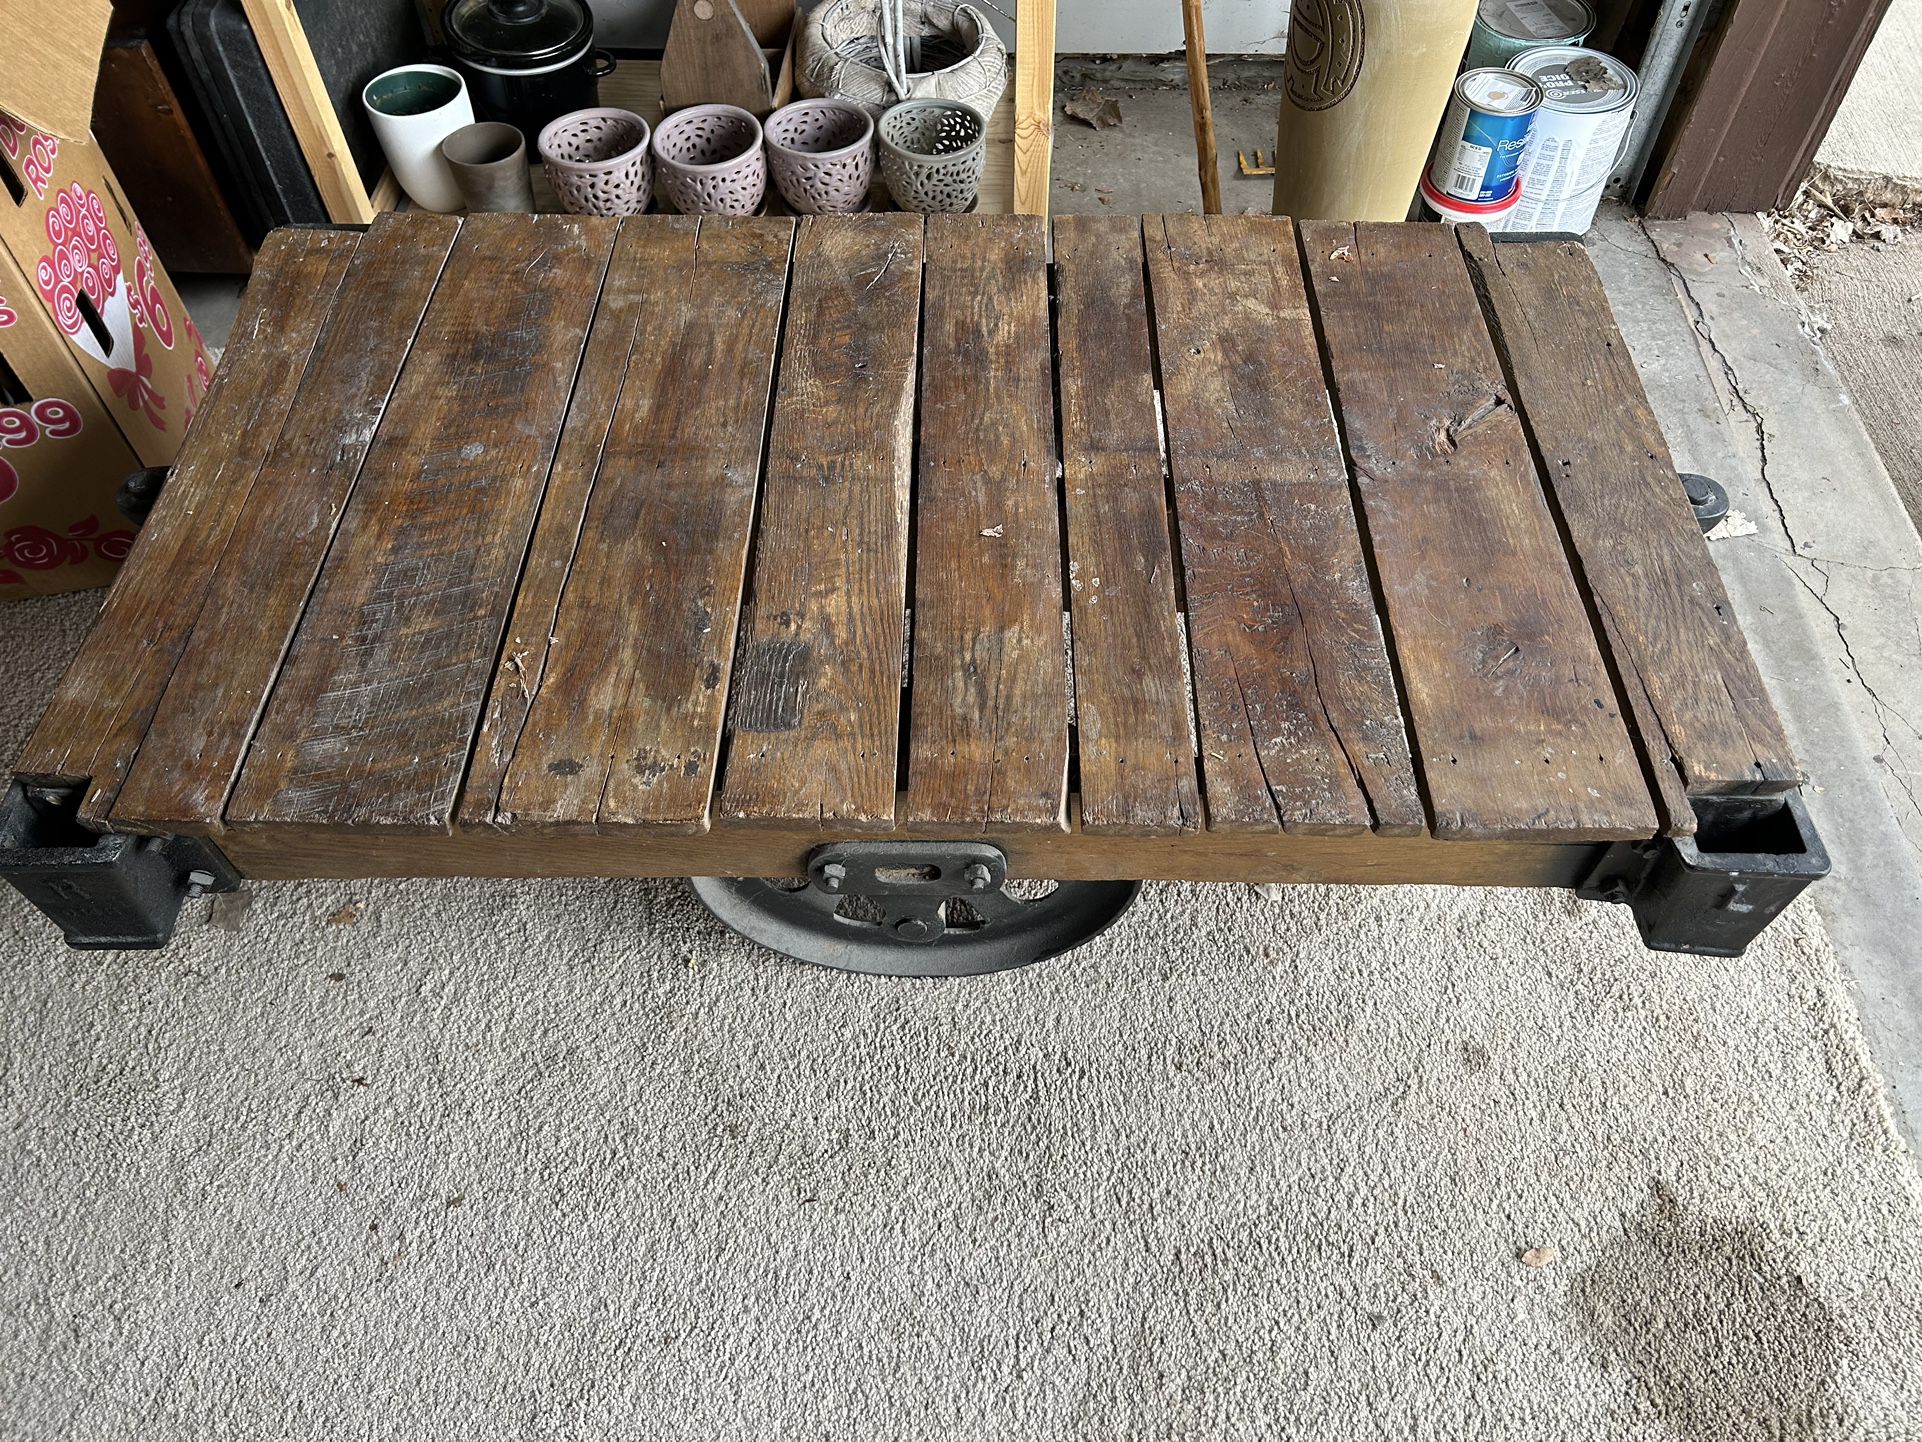 Antique Furniture Cart Coffee Table